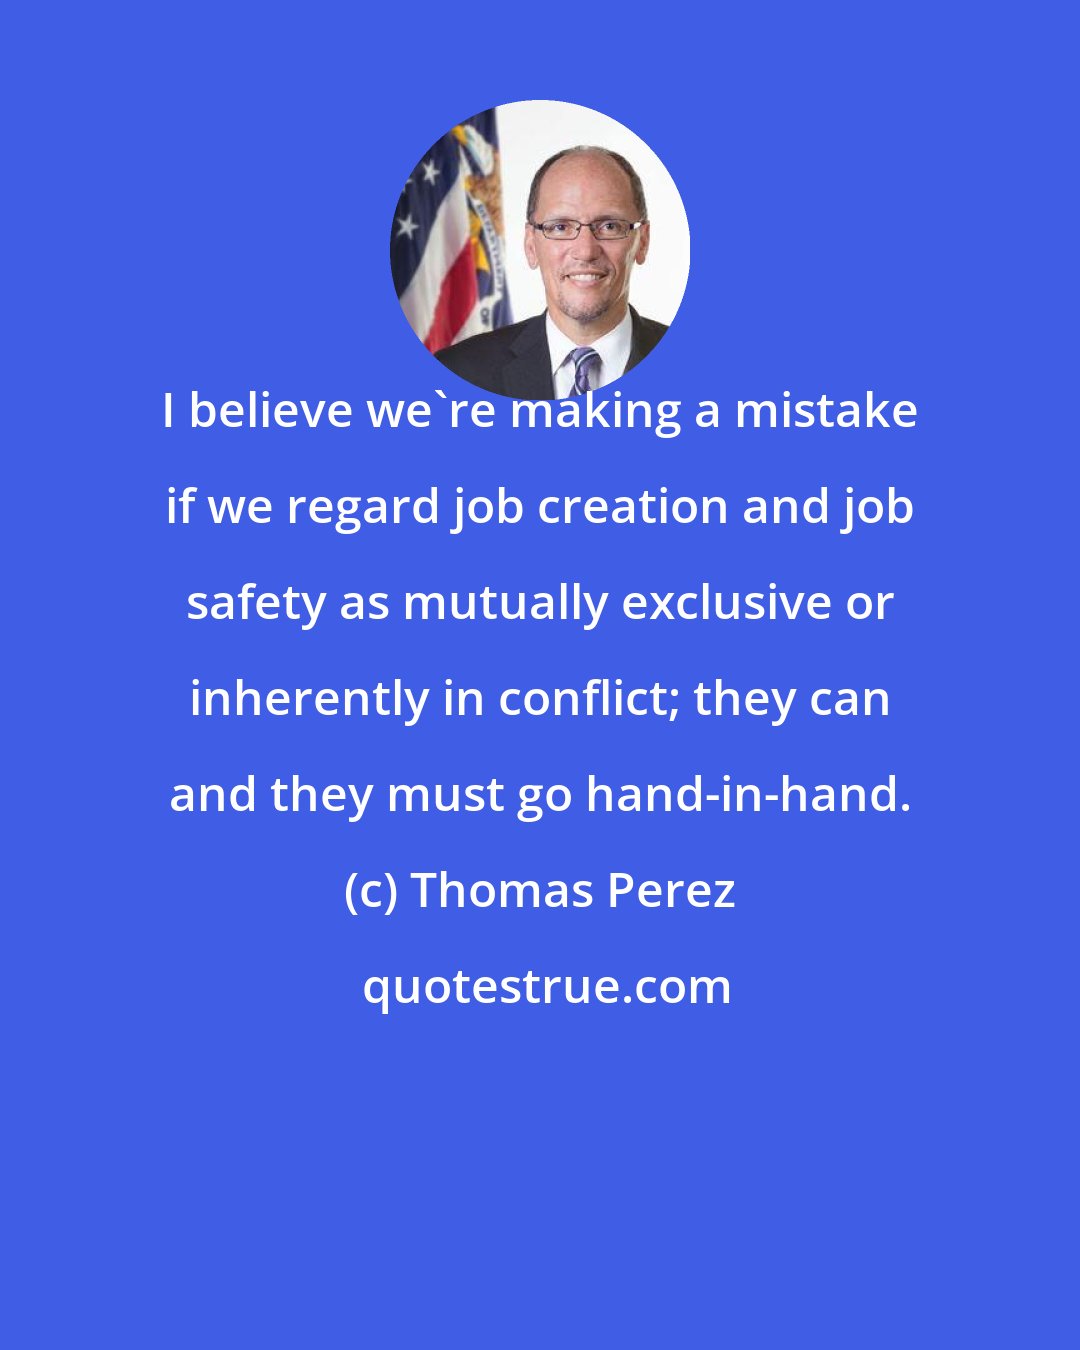 Thomas Perez: I believe we're making a mistake if we regard job creation and job safety as mutually exclusive or inherently in conflict; they can and they must go hand-in-hand.